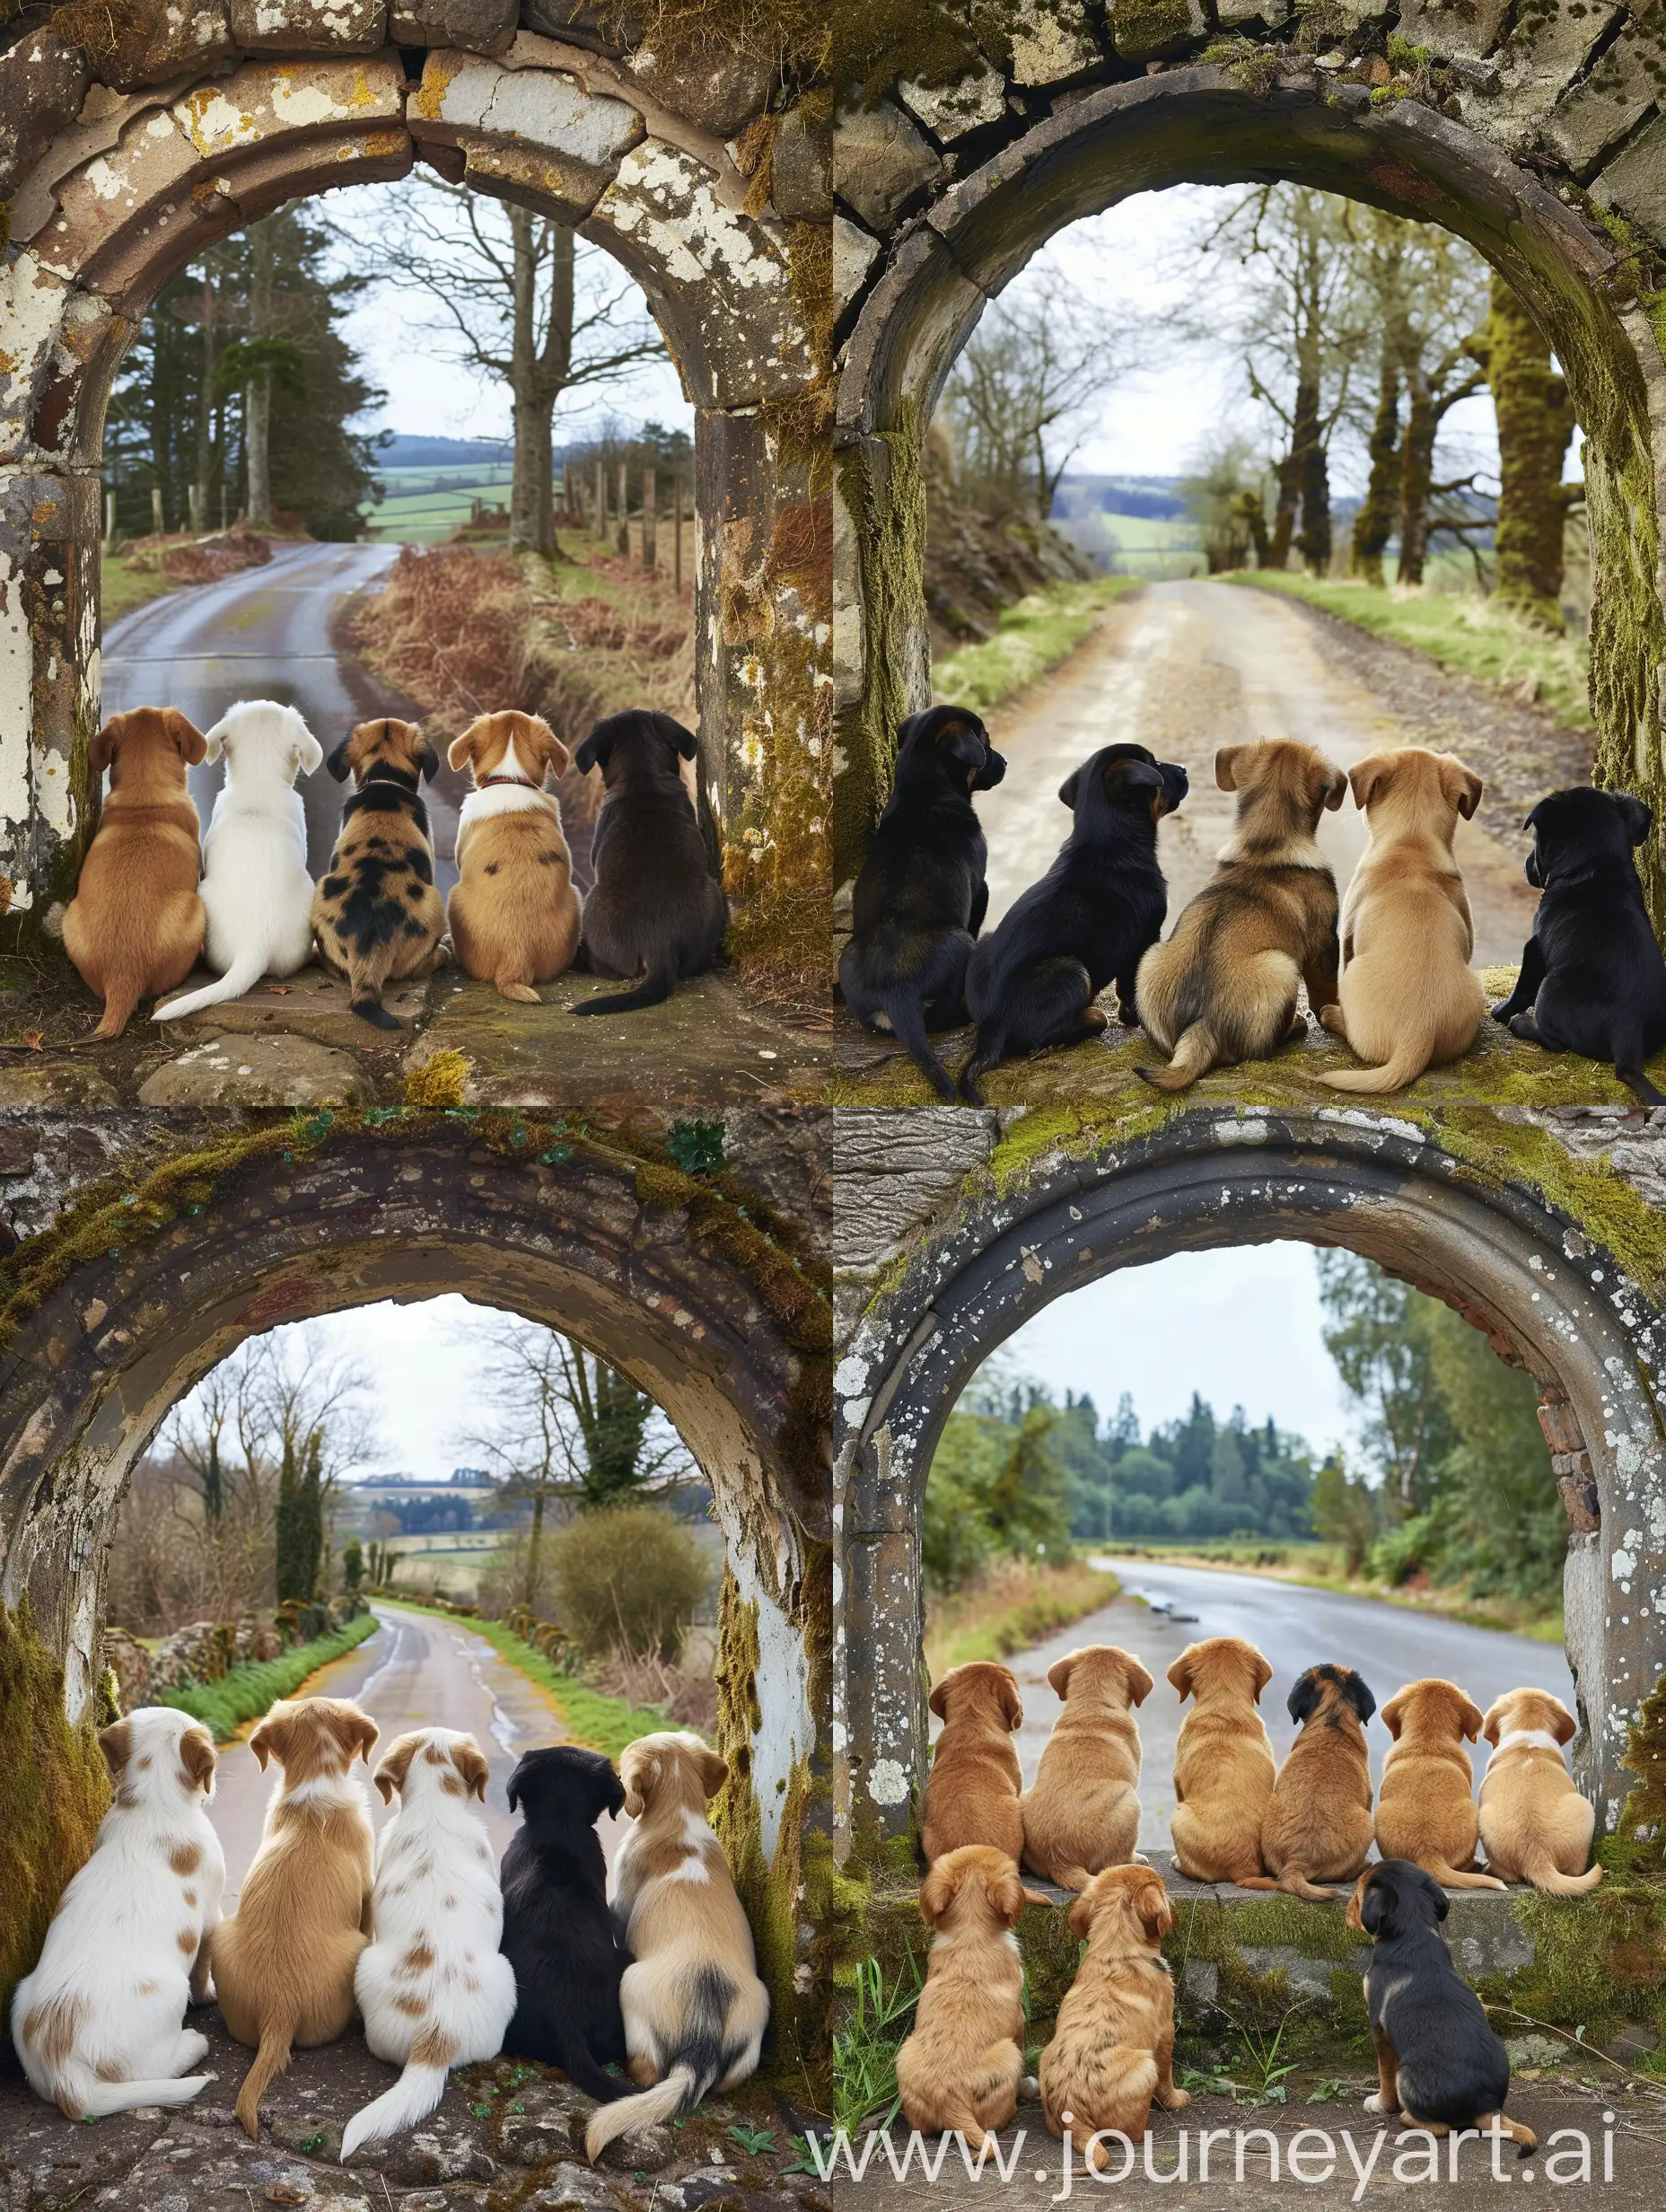 Back view of six puppies sitting against an old, mossy arched stone wall background with country road and trees visible, illustration landscape